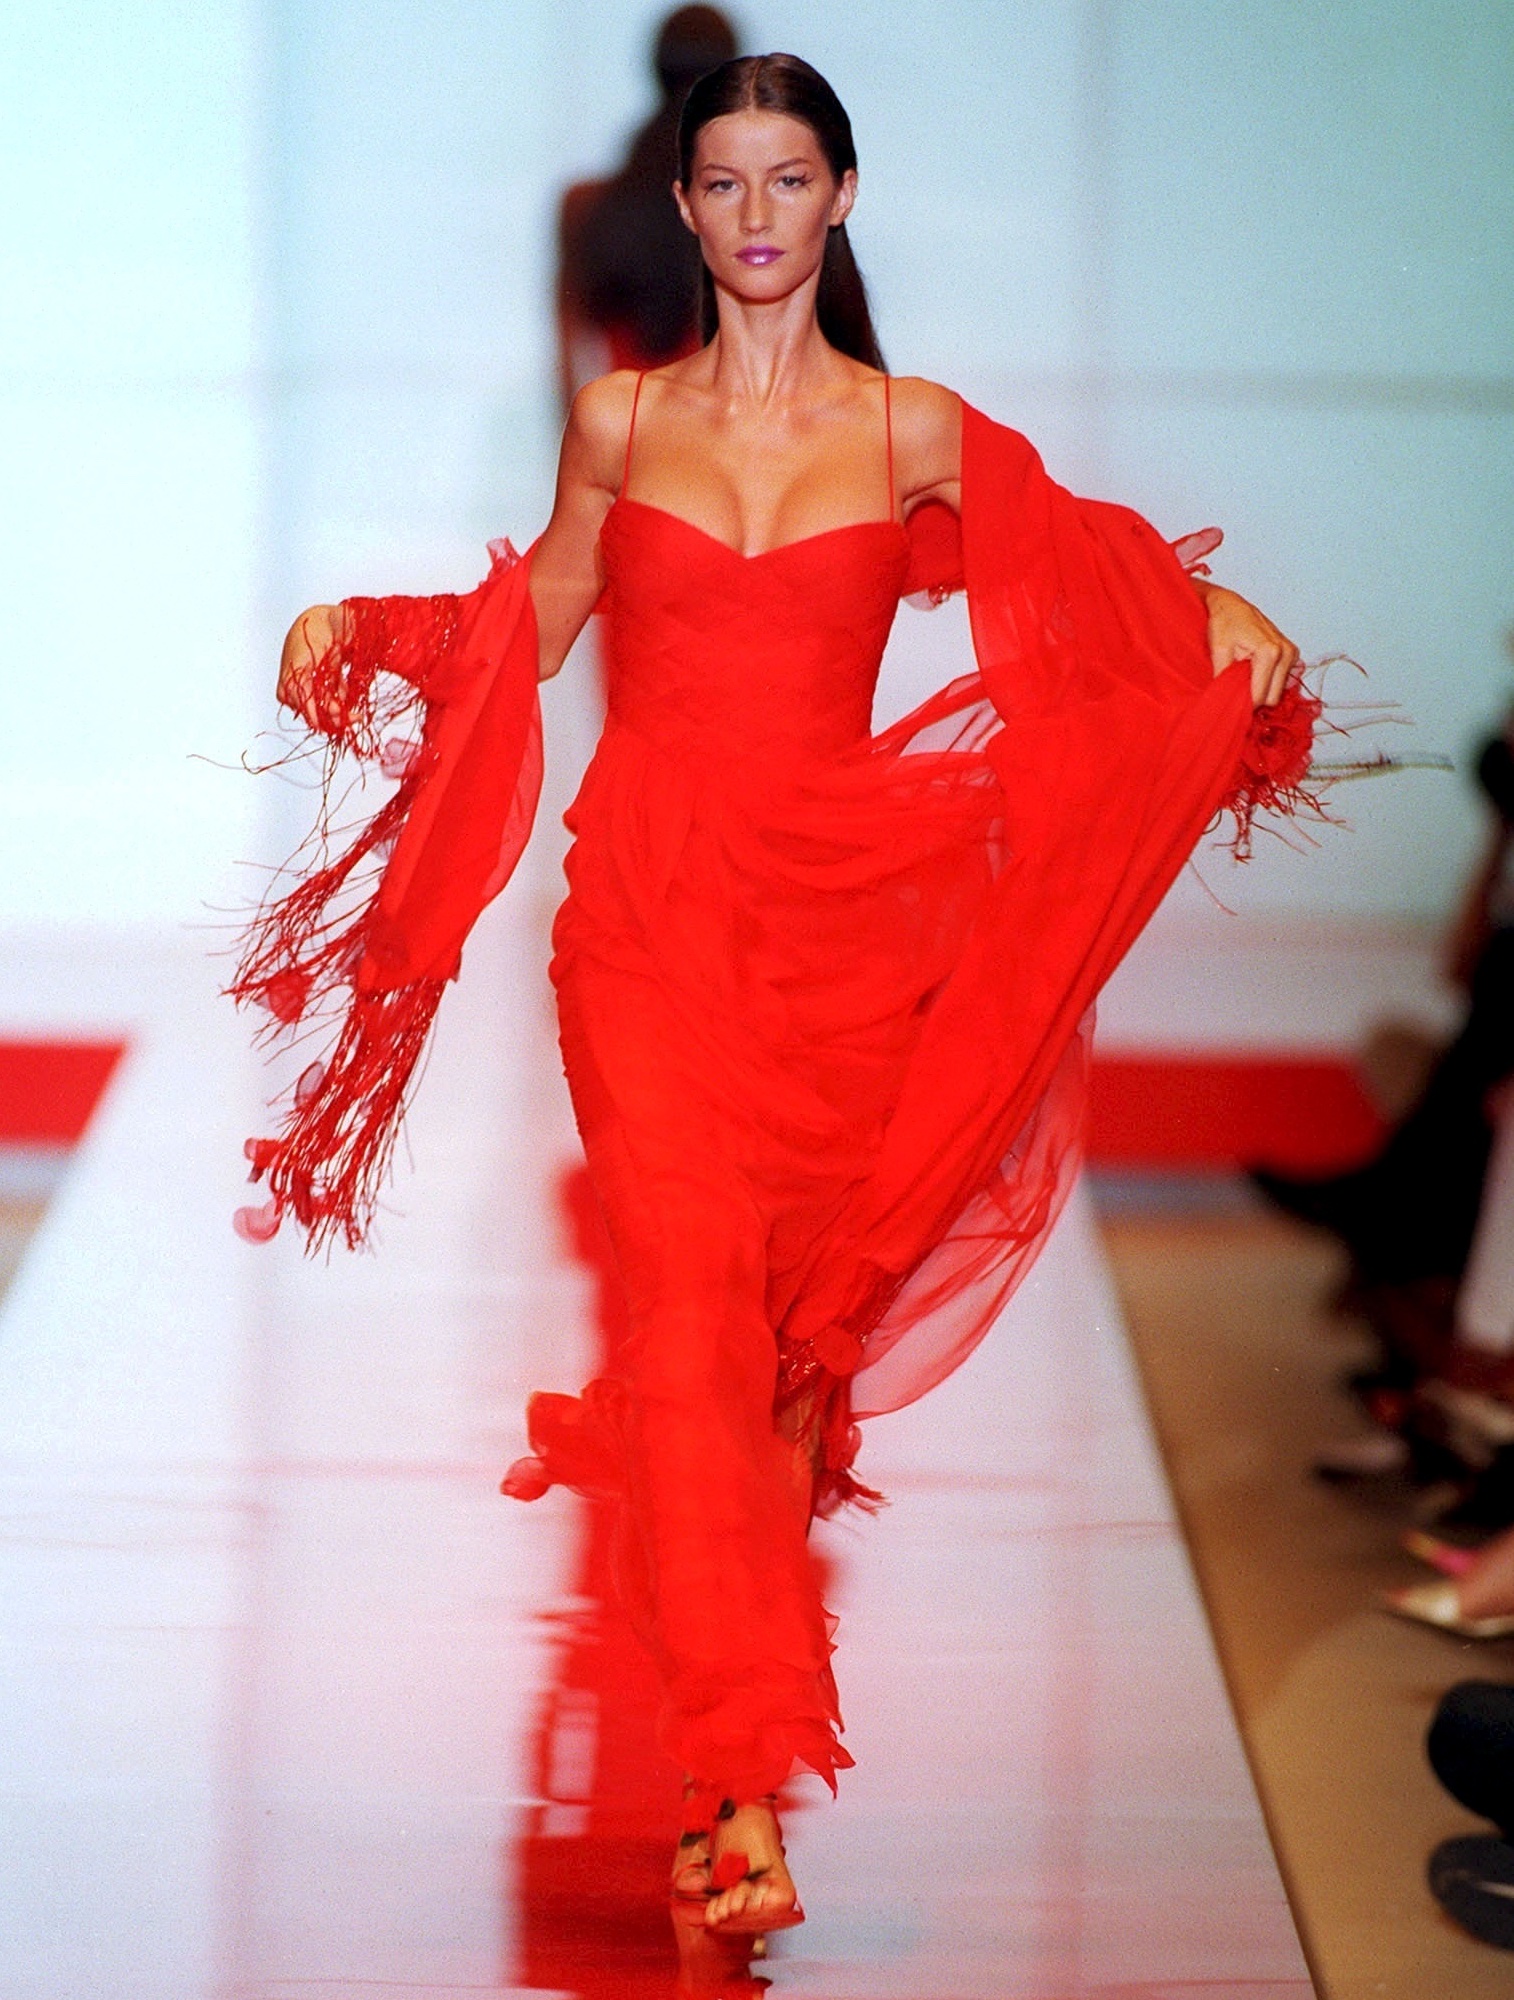 Gisele Bünchen walking for Valentino Haute Couture AW99-00 show in a red dress